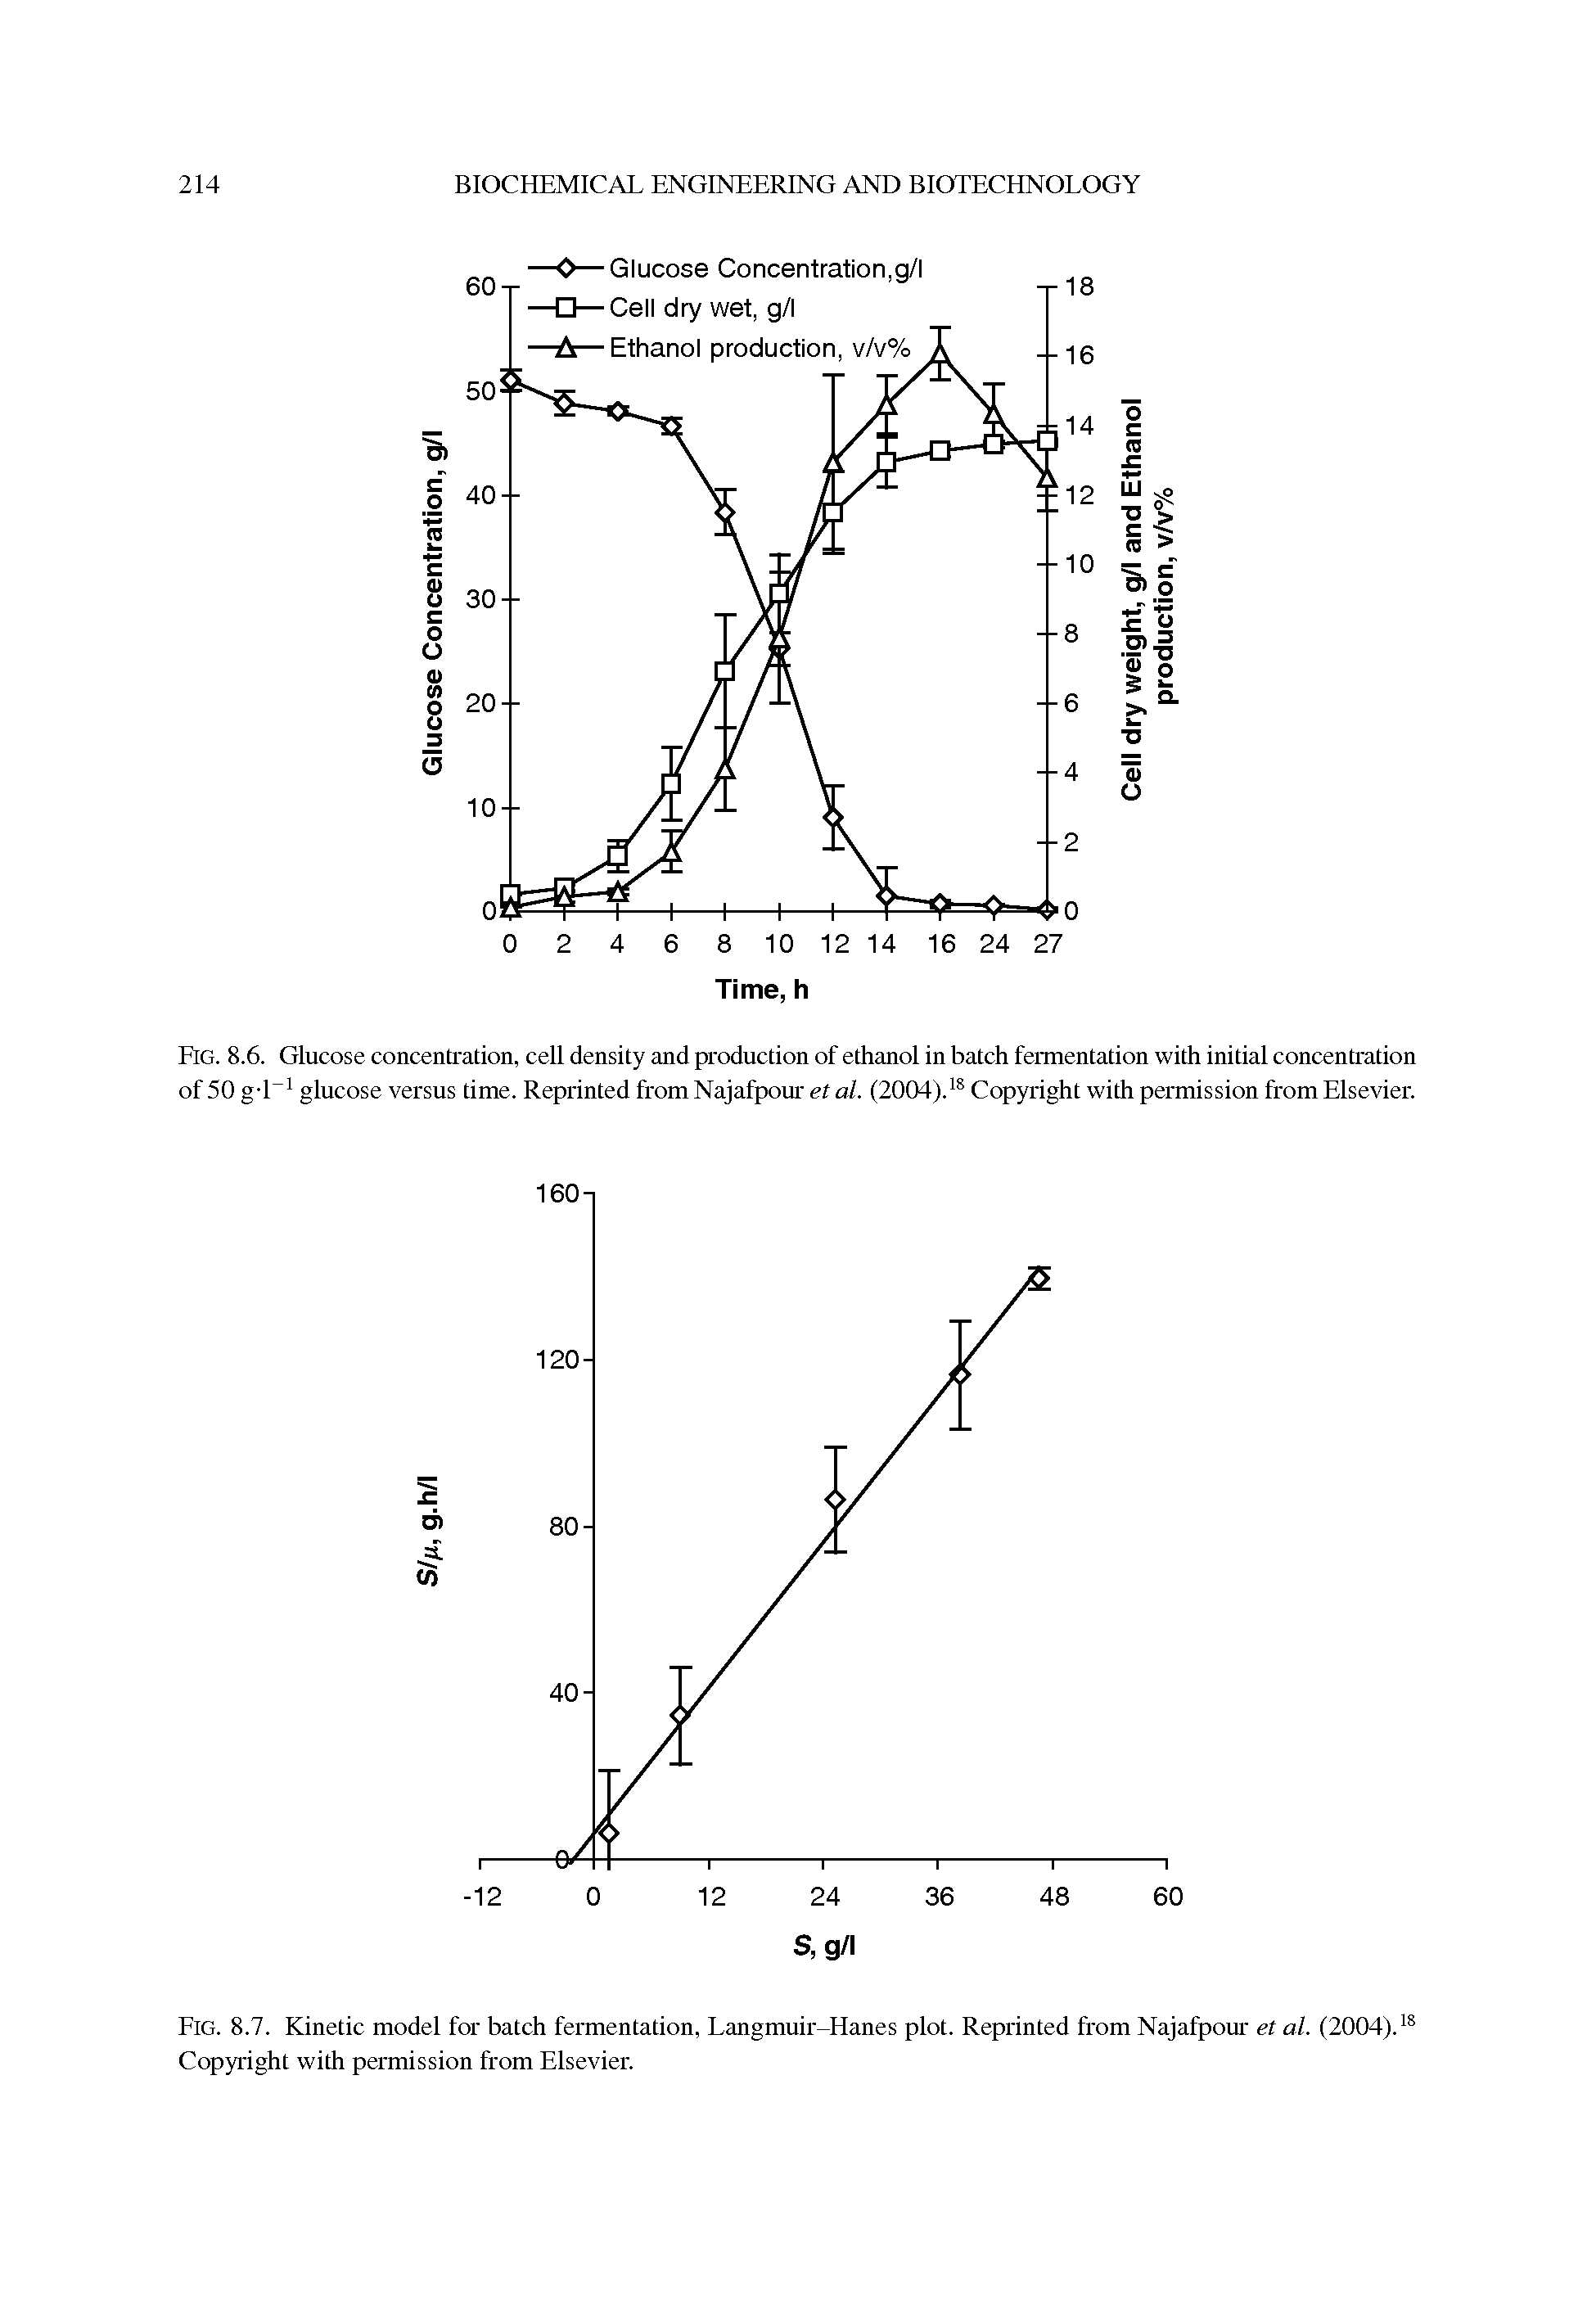 Fig. 8.7. Kinetic model for batch fermentation, Langmuir-Hanes plot. Reprinted from Najafpour et al. (2004).18 Copyright with permission from Elsevier.